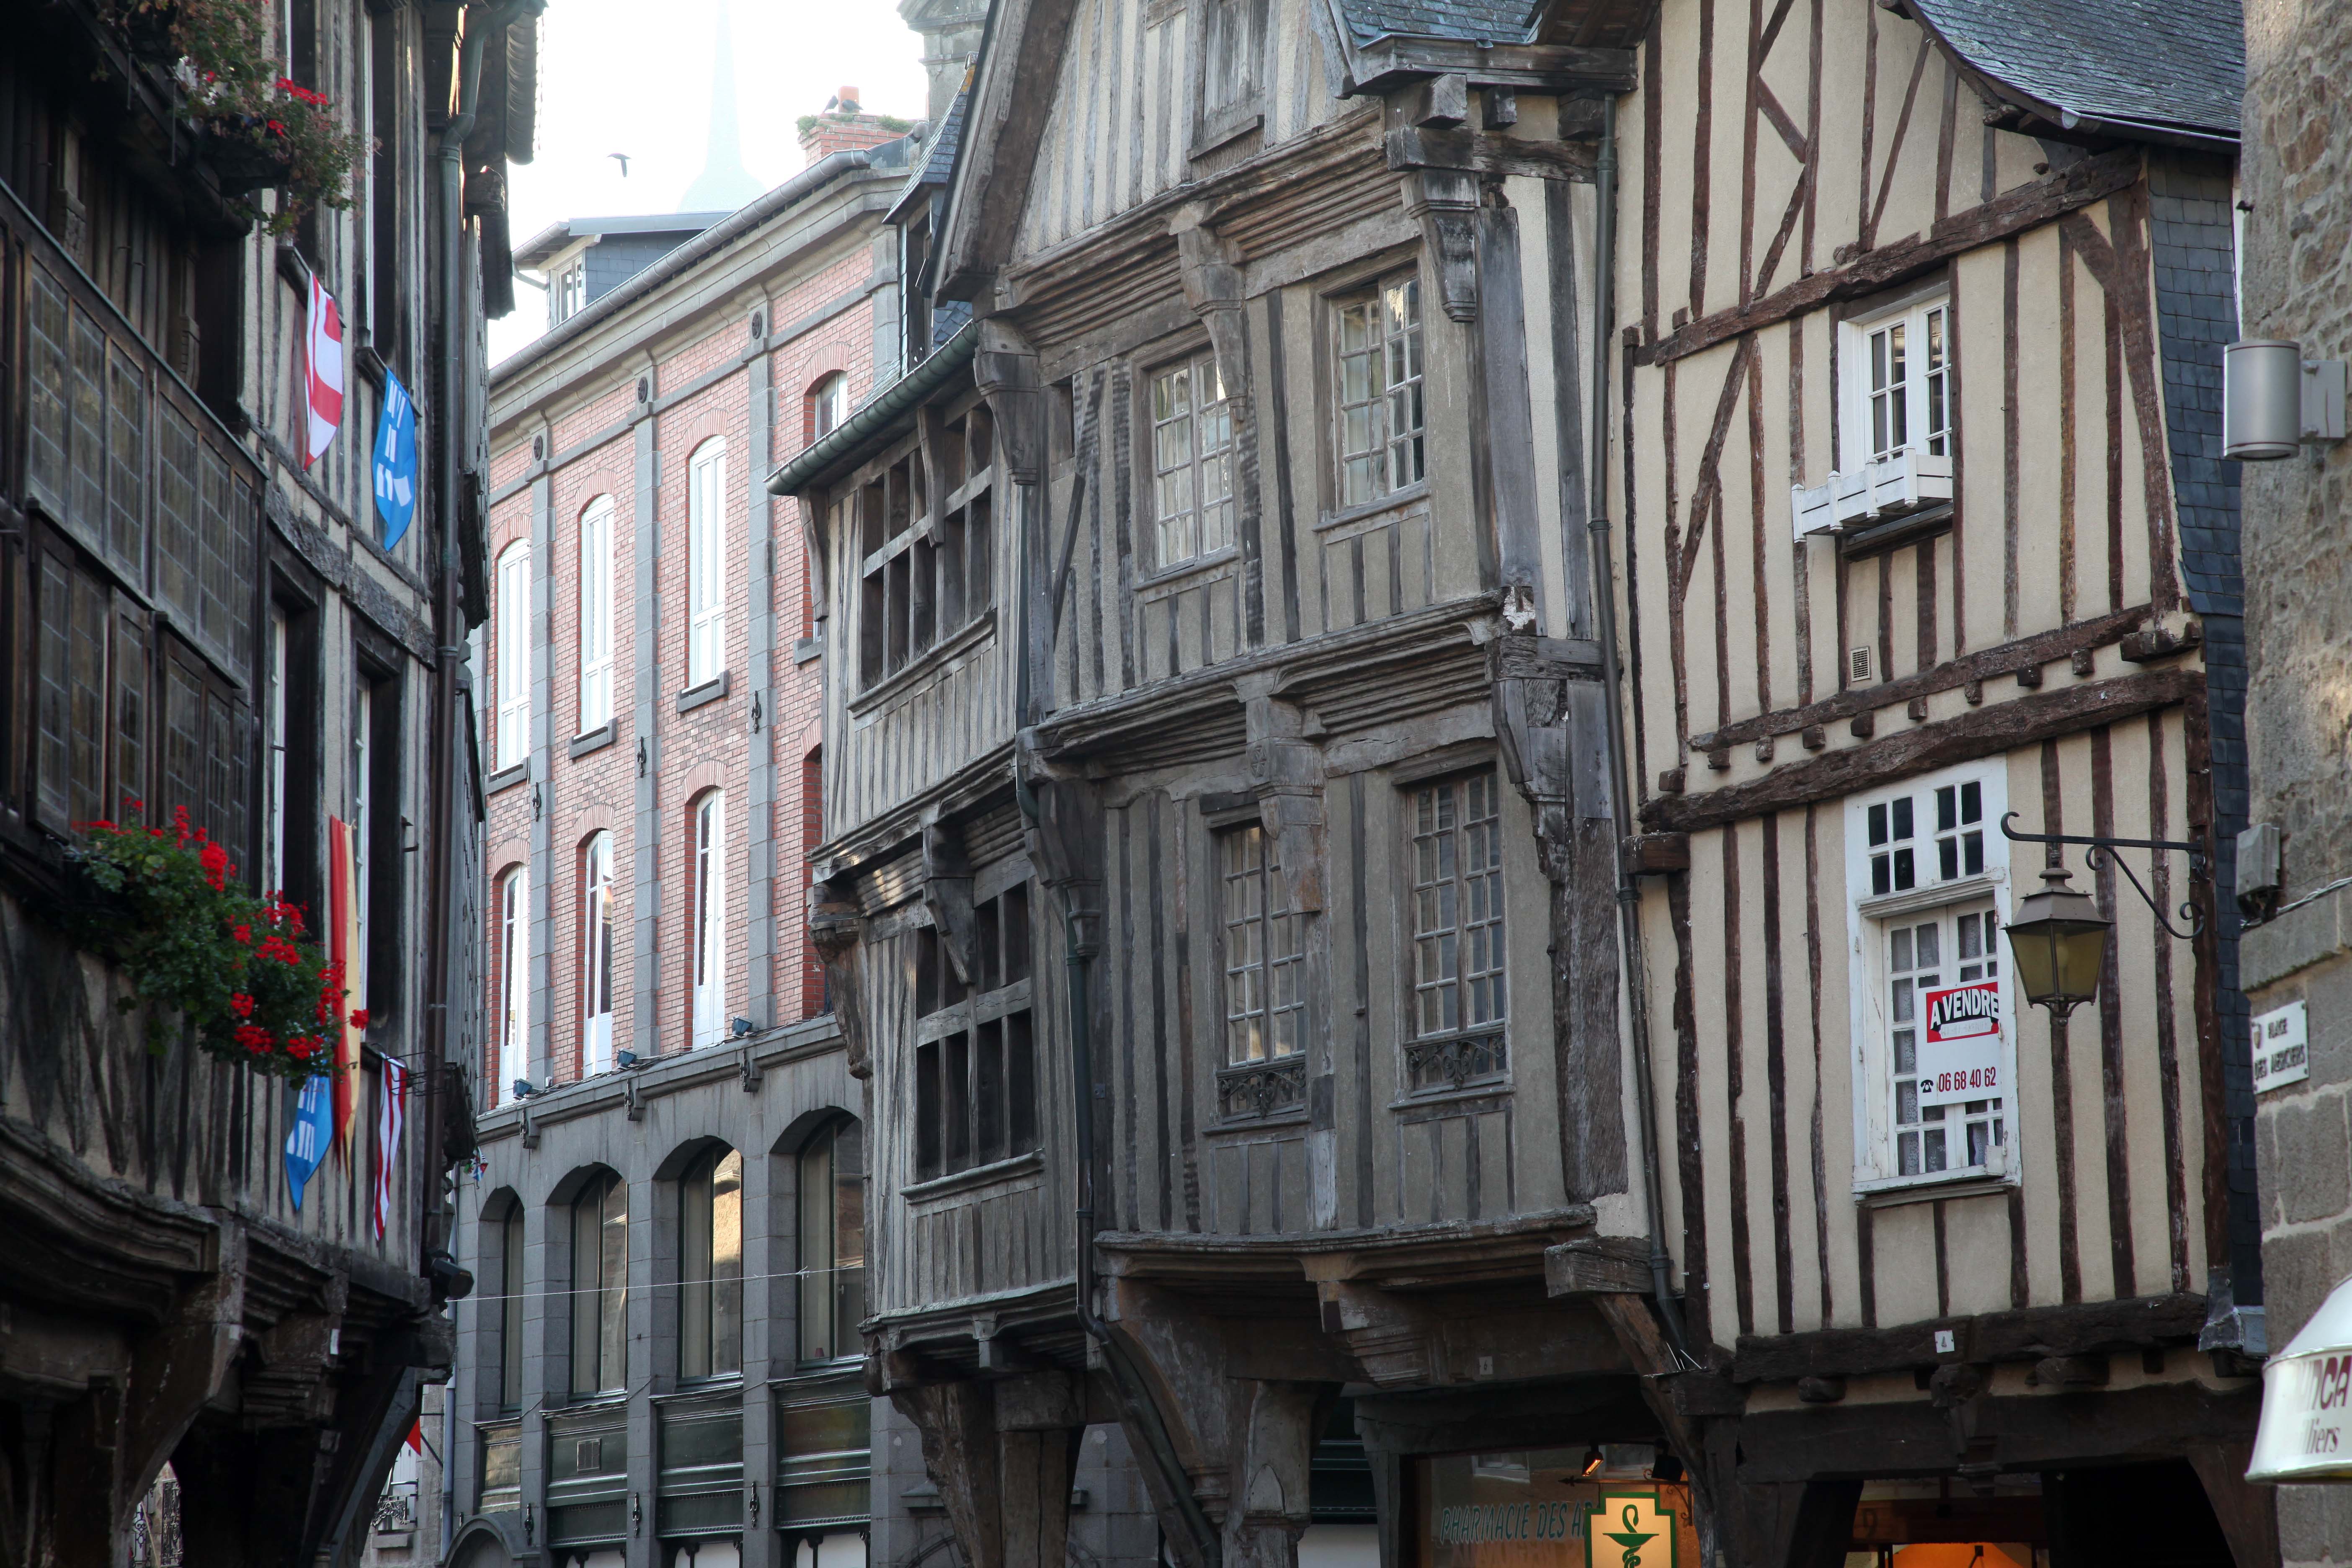 The medieval town full of half timbered buildings dating from the 13th and 14th centuries, with cobbled rambling streets all carefully restored and preserved.